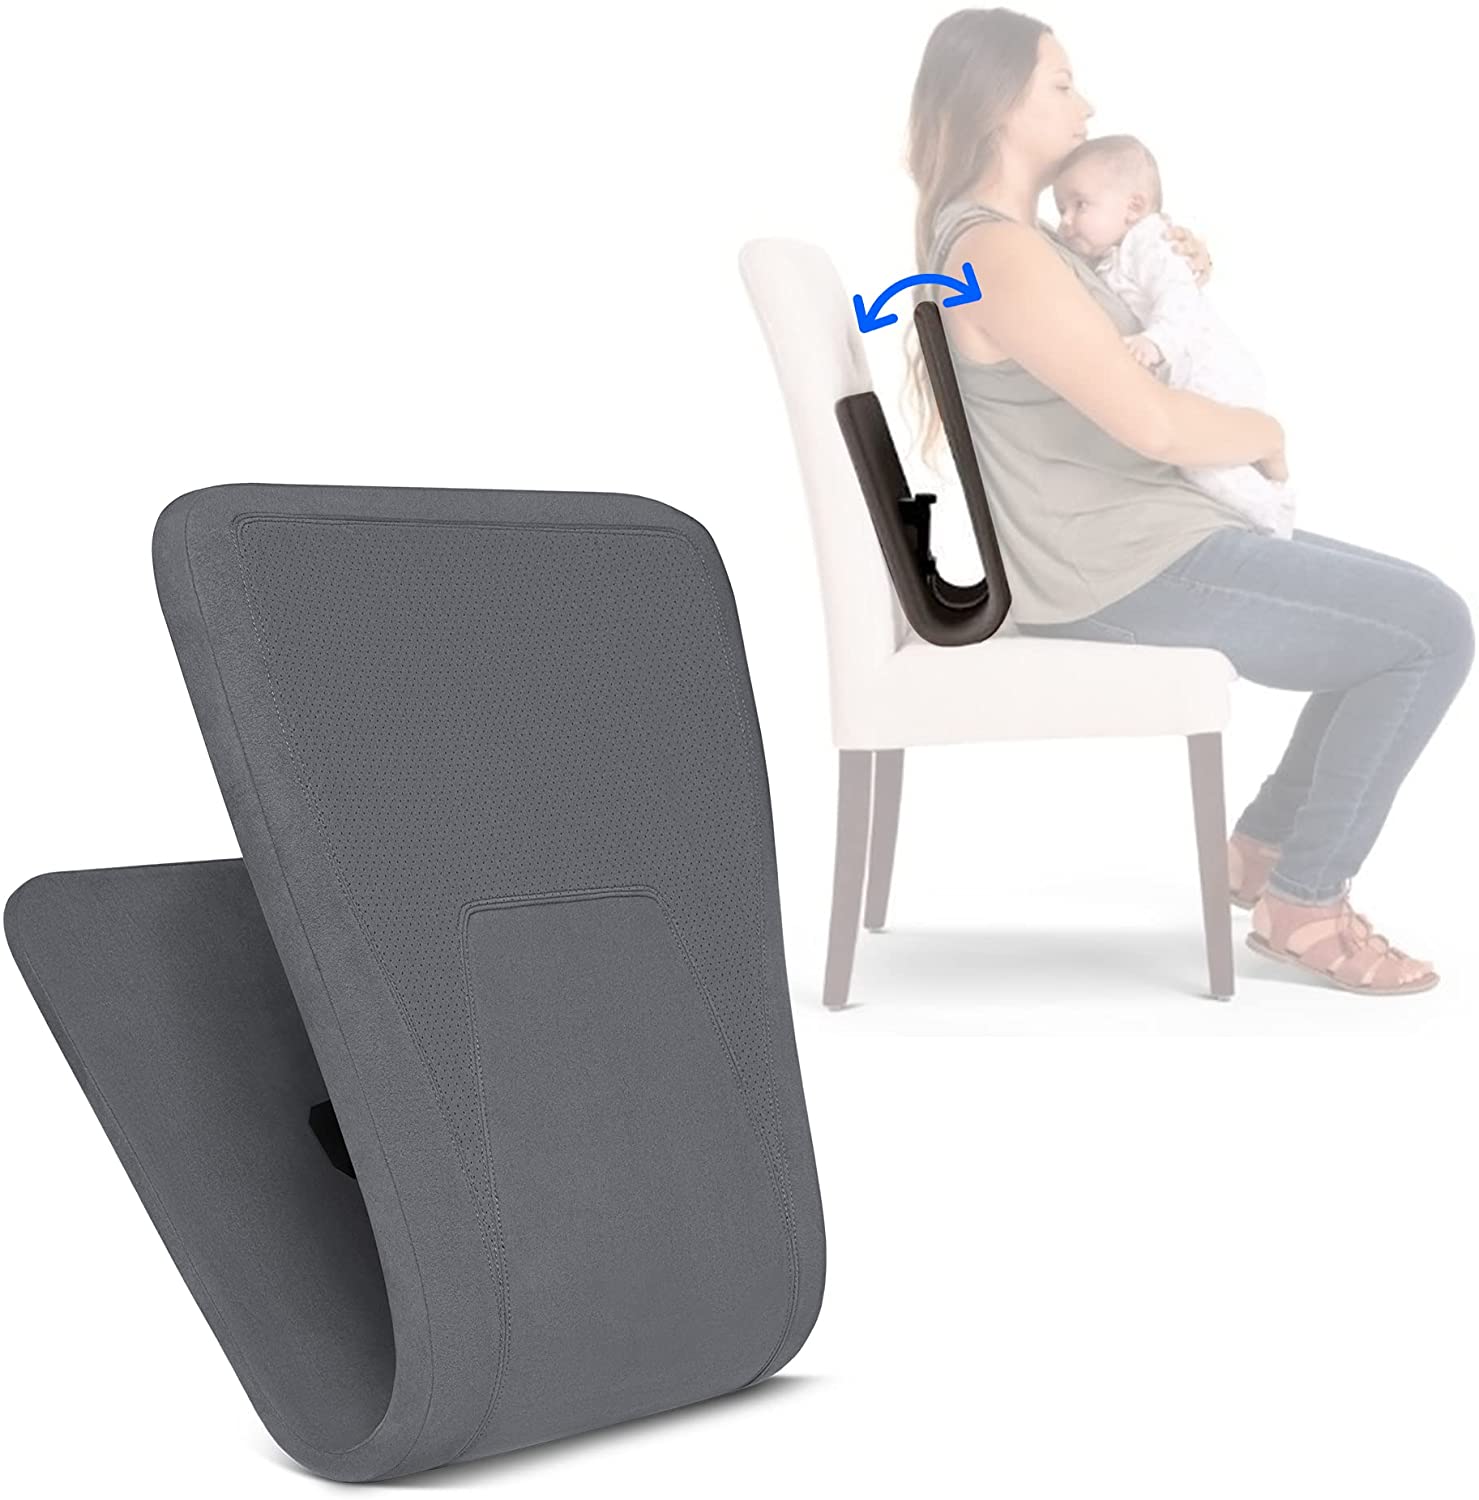 Best Amazon Baby Products